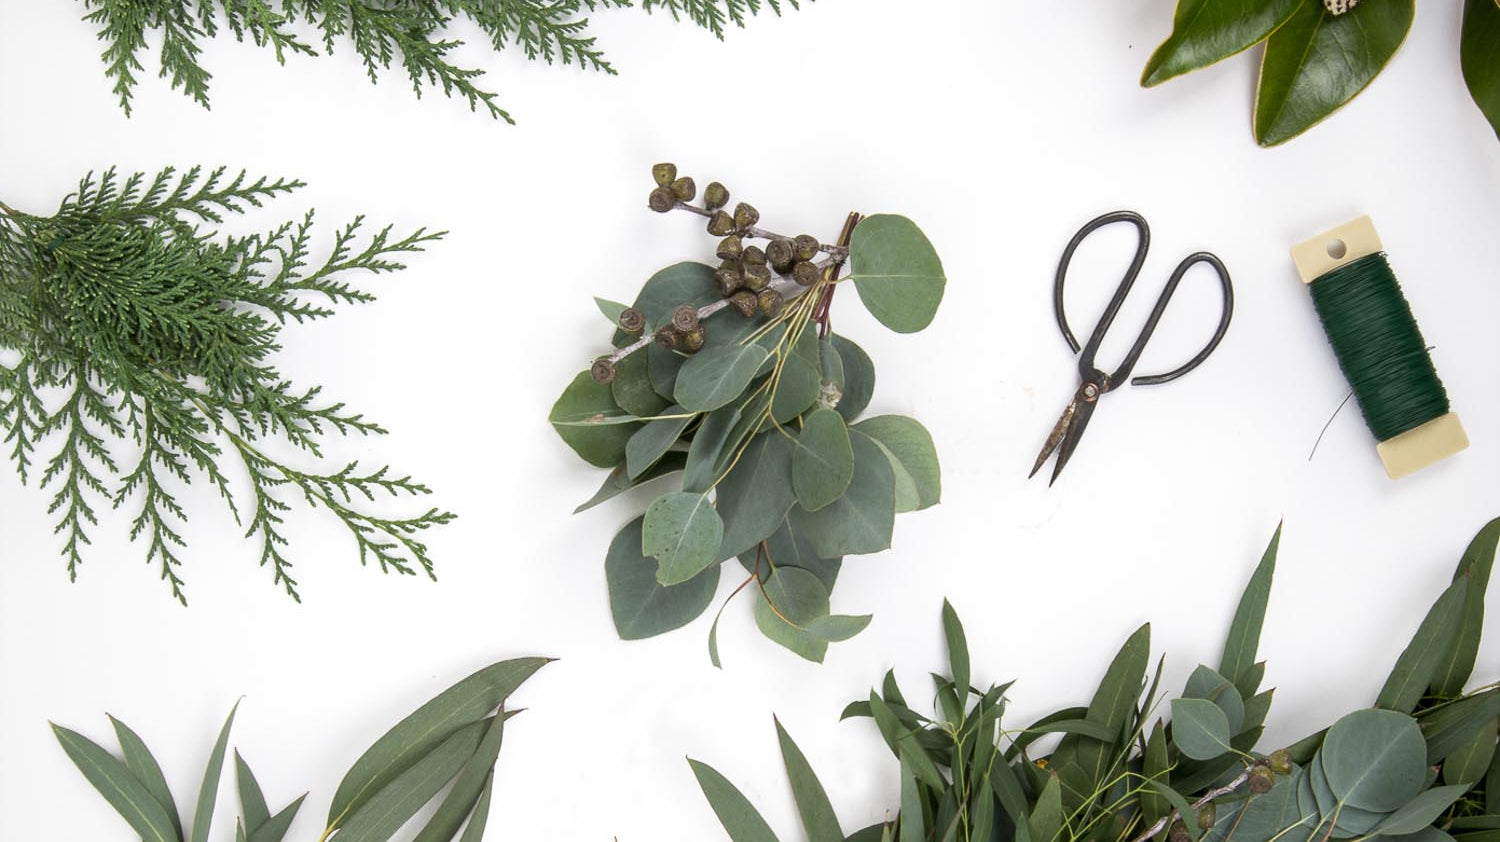 Spread Cheer with these Holiday Plant Crafts